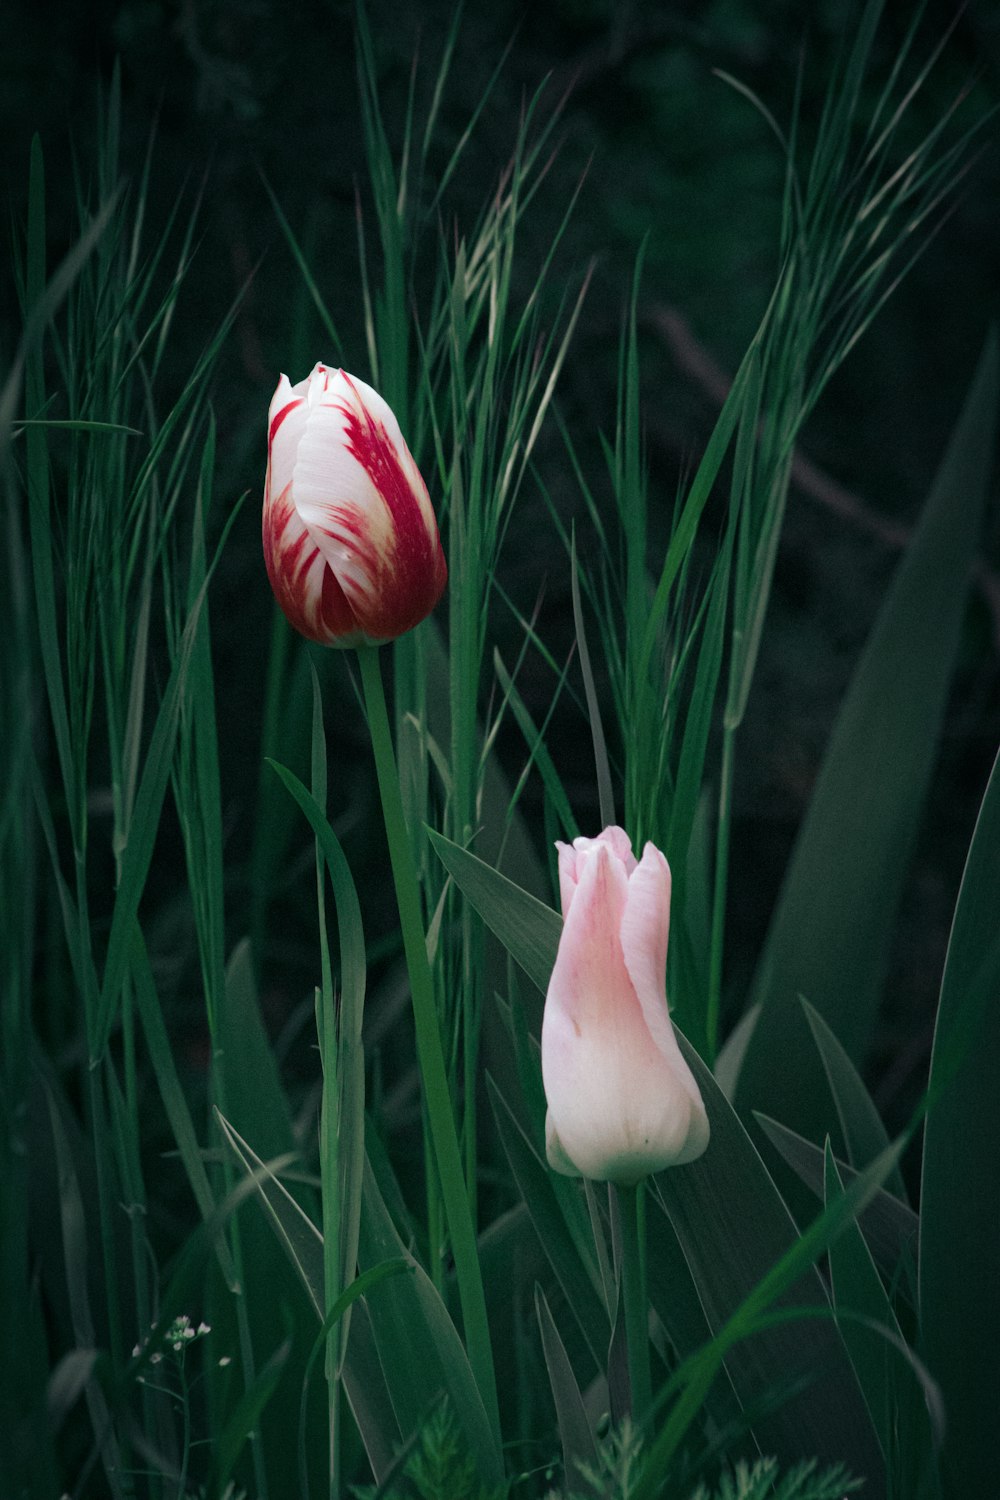 two tulips in a field of tall grass